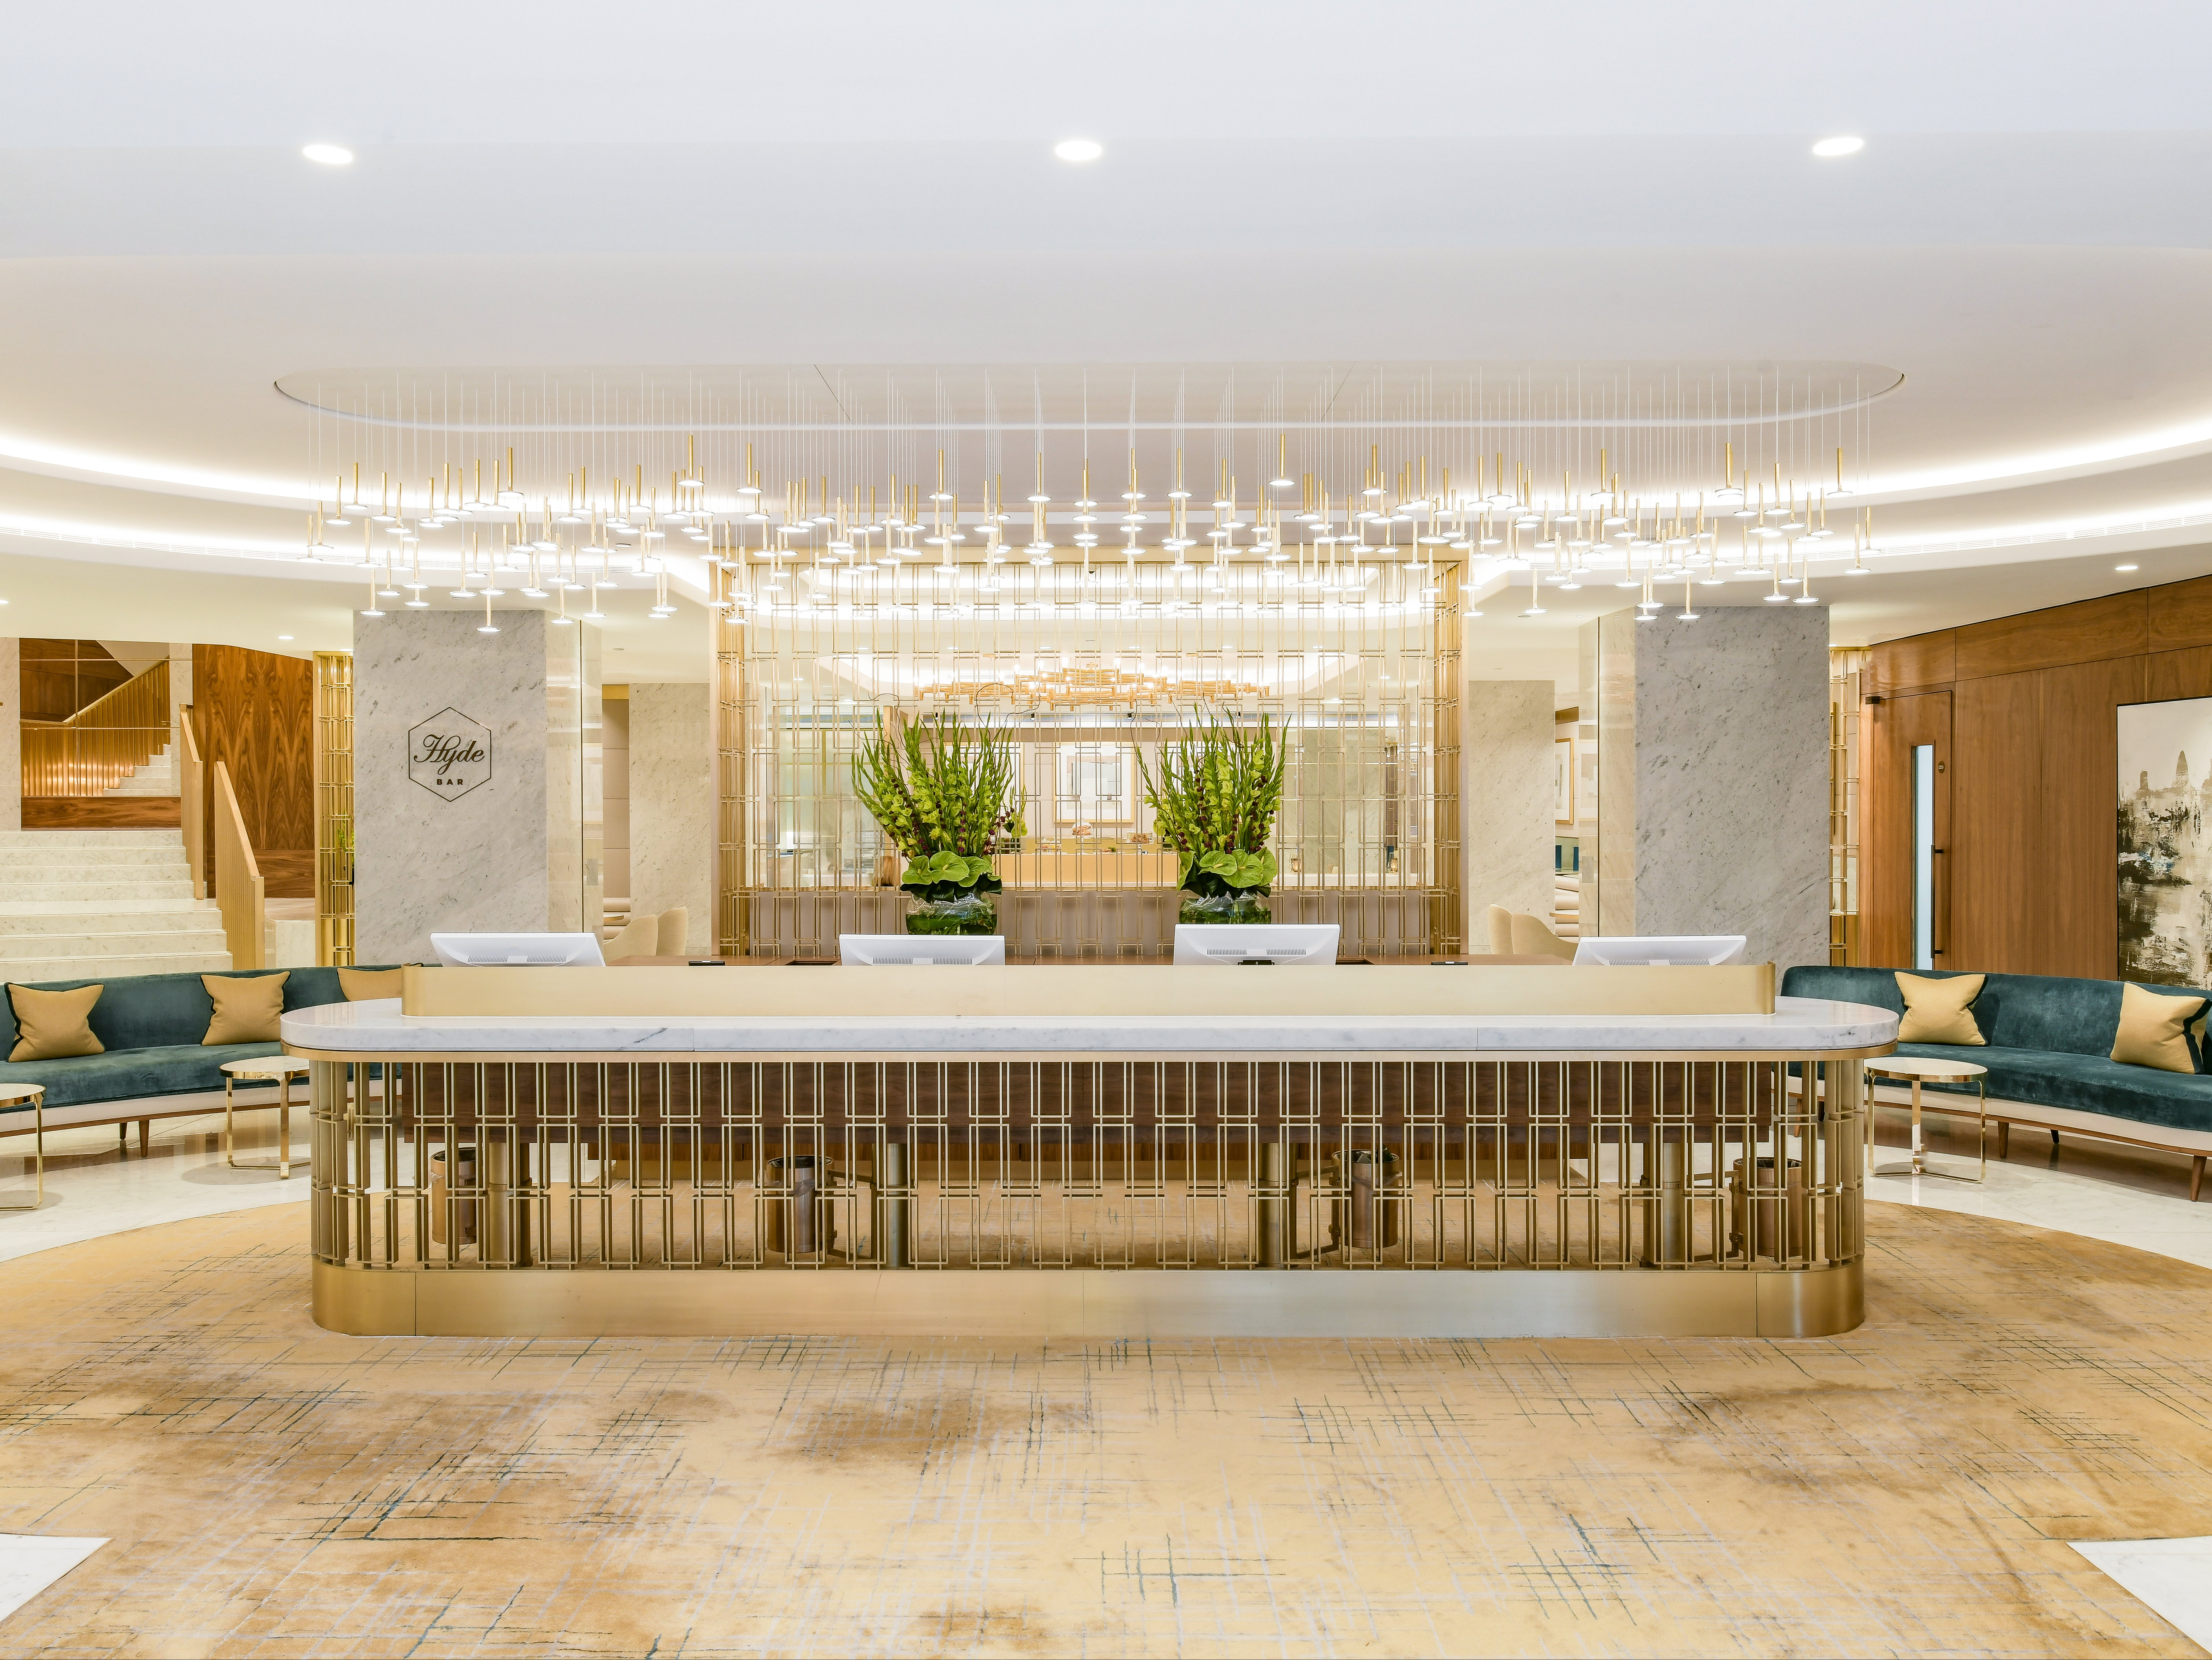 First impressions: The lobby of Royal Lancaster London